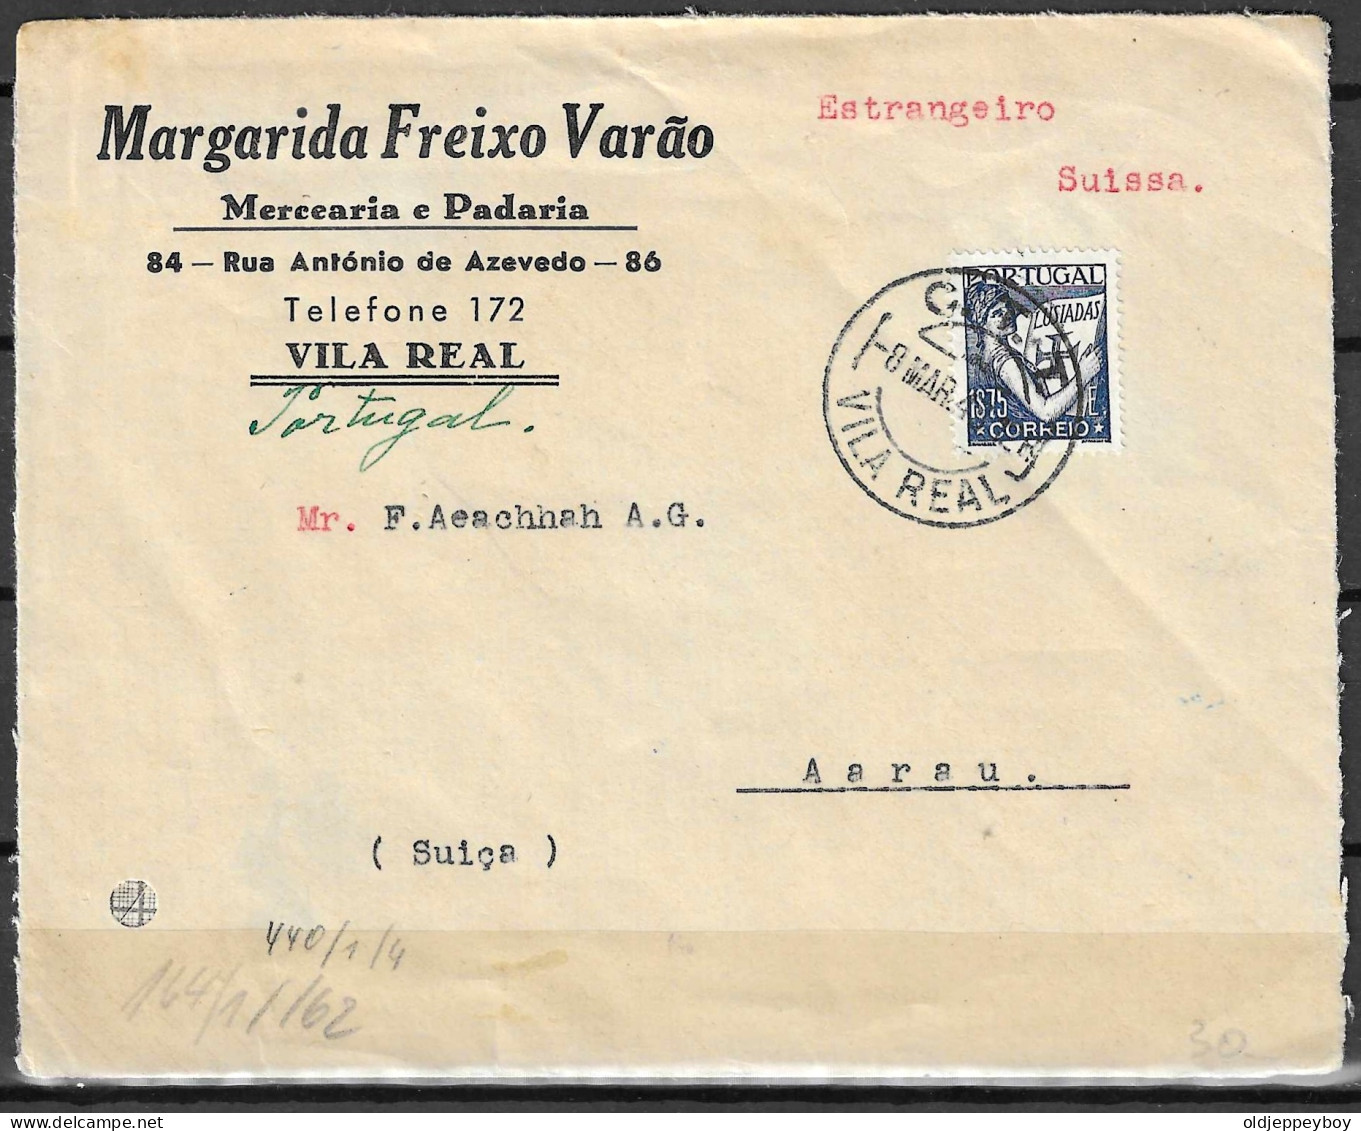 1943 PORTUGAL NAZI CENSORSHIP  PUBLICITY VILA REAL  ENVELOPE COVER AIRMAIL TO  AARAU SUISSA SUISSE SWITZERLAND - Covers & Documents